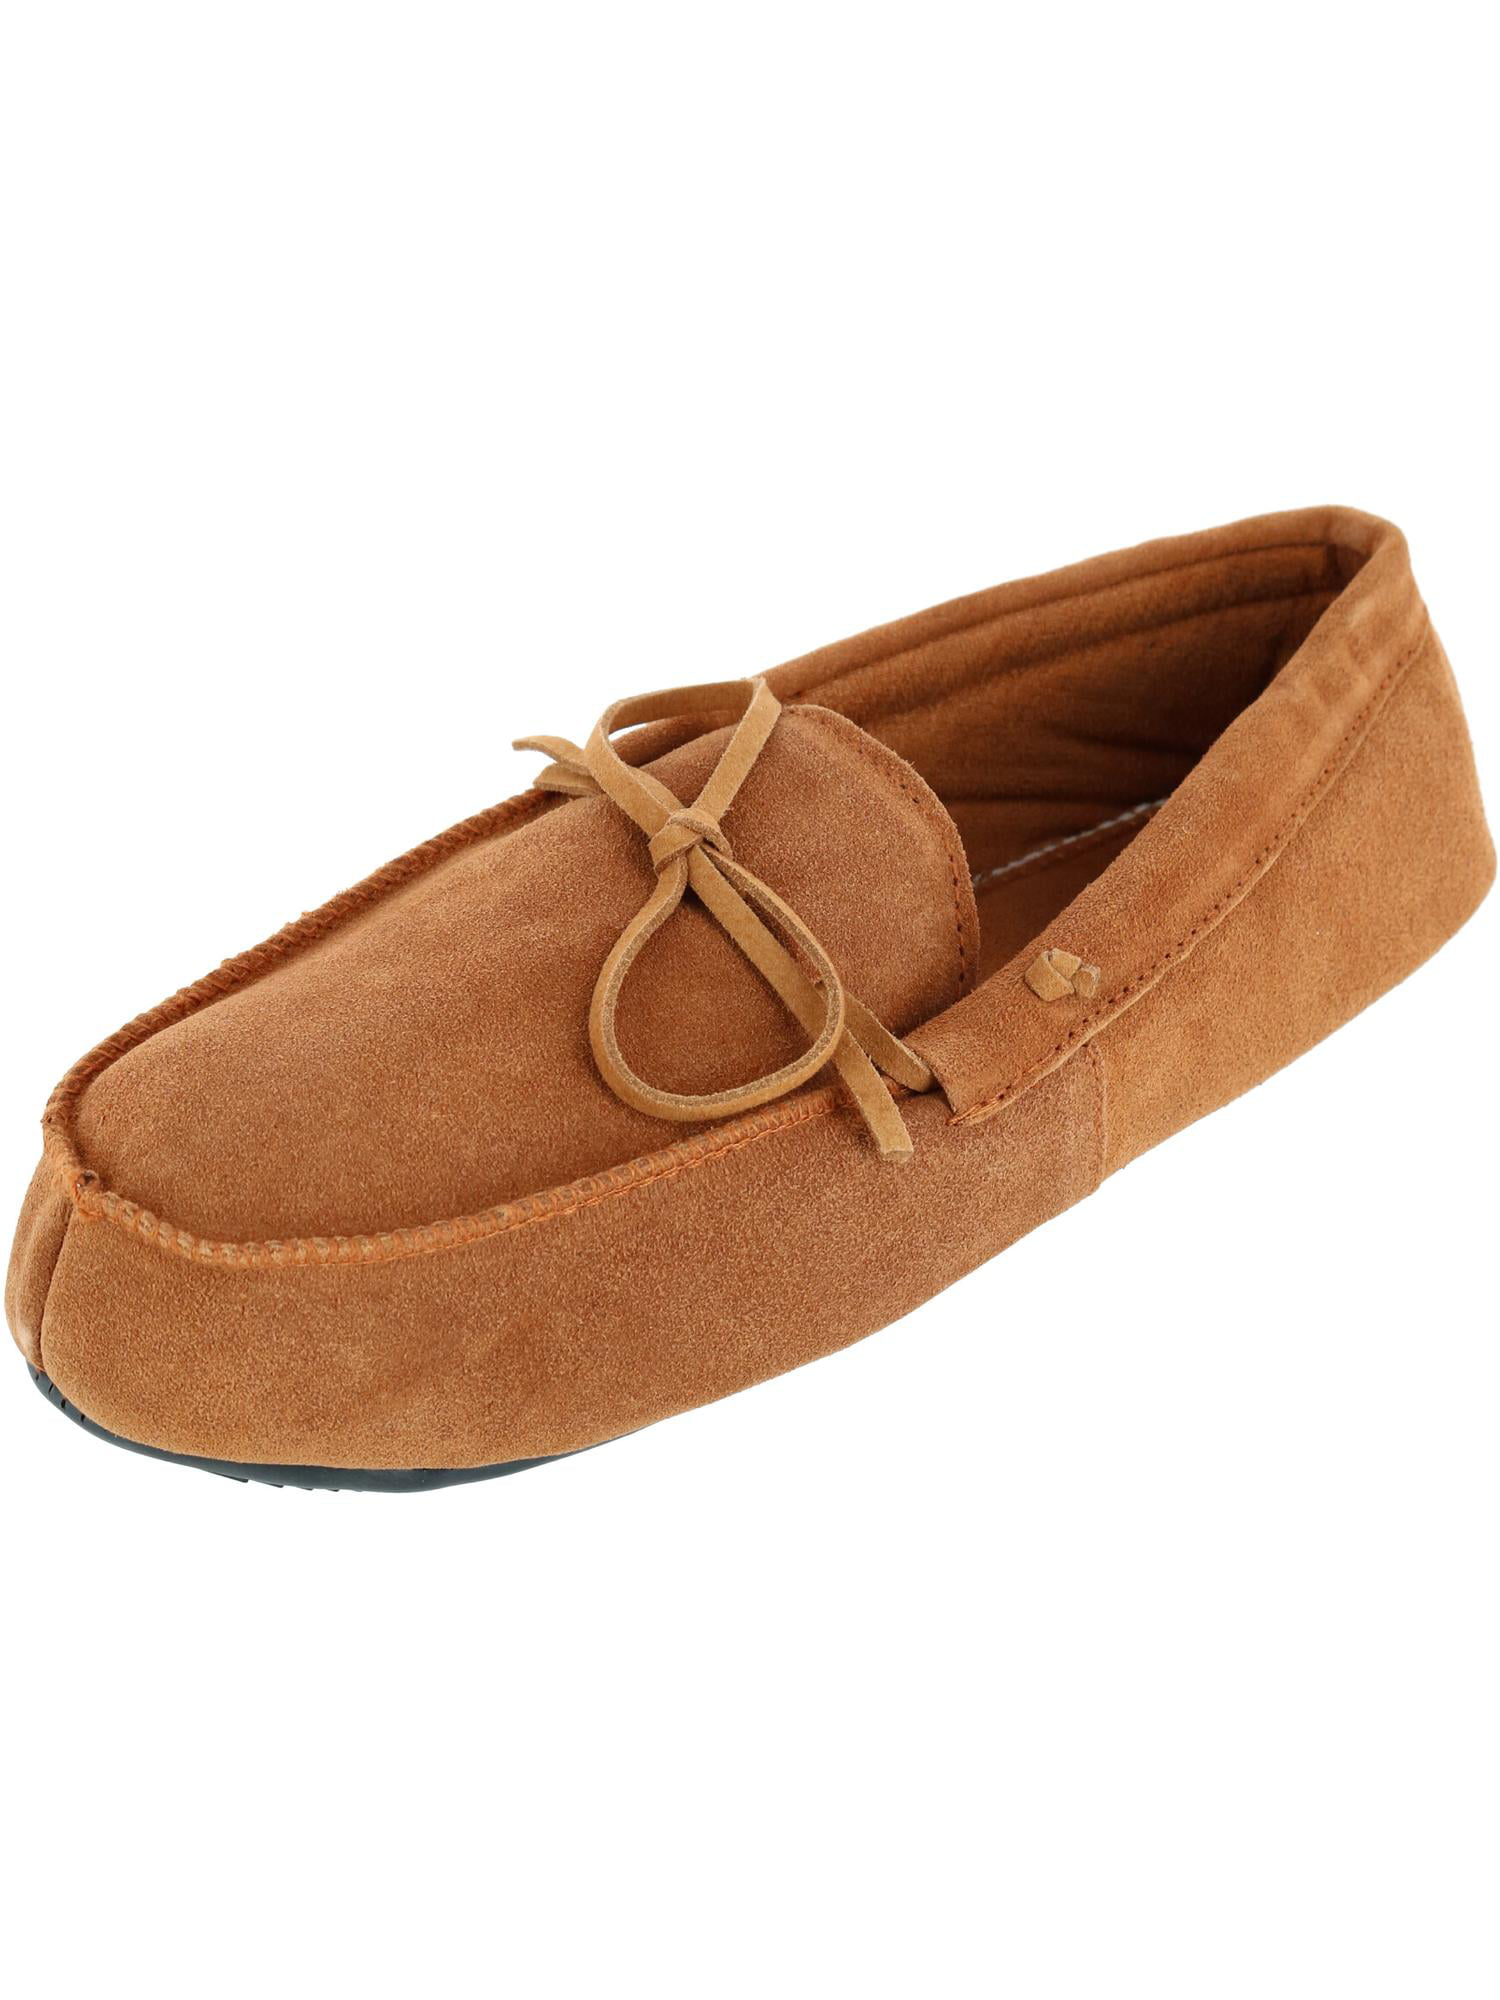 Mens soft sole suede moccasin slippers 6 7 8 9 10 11 12 warm